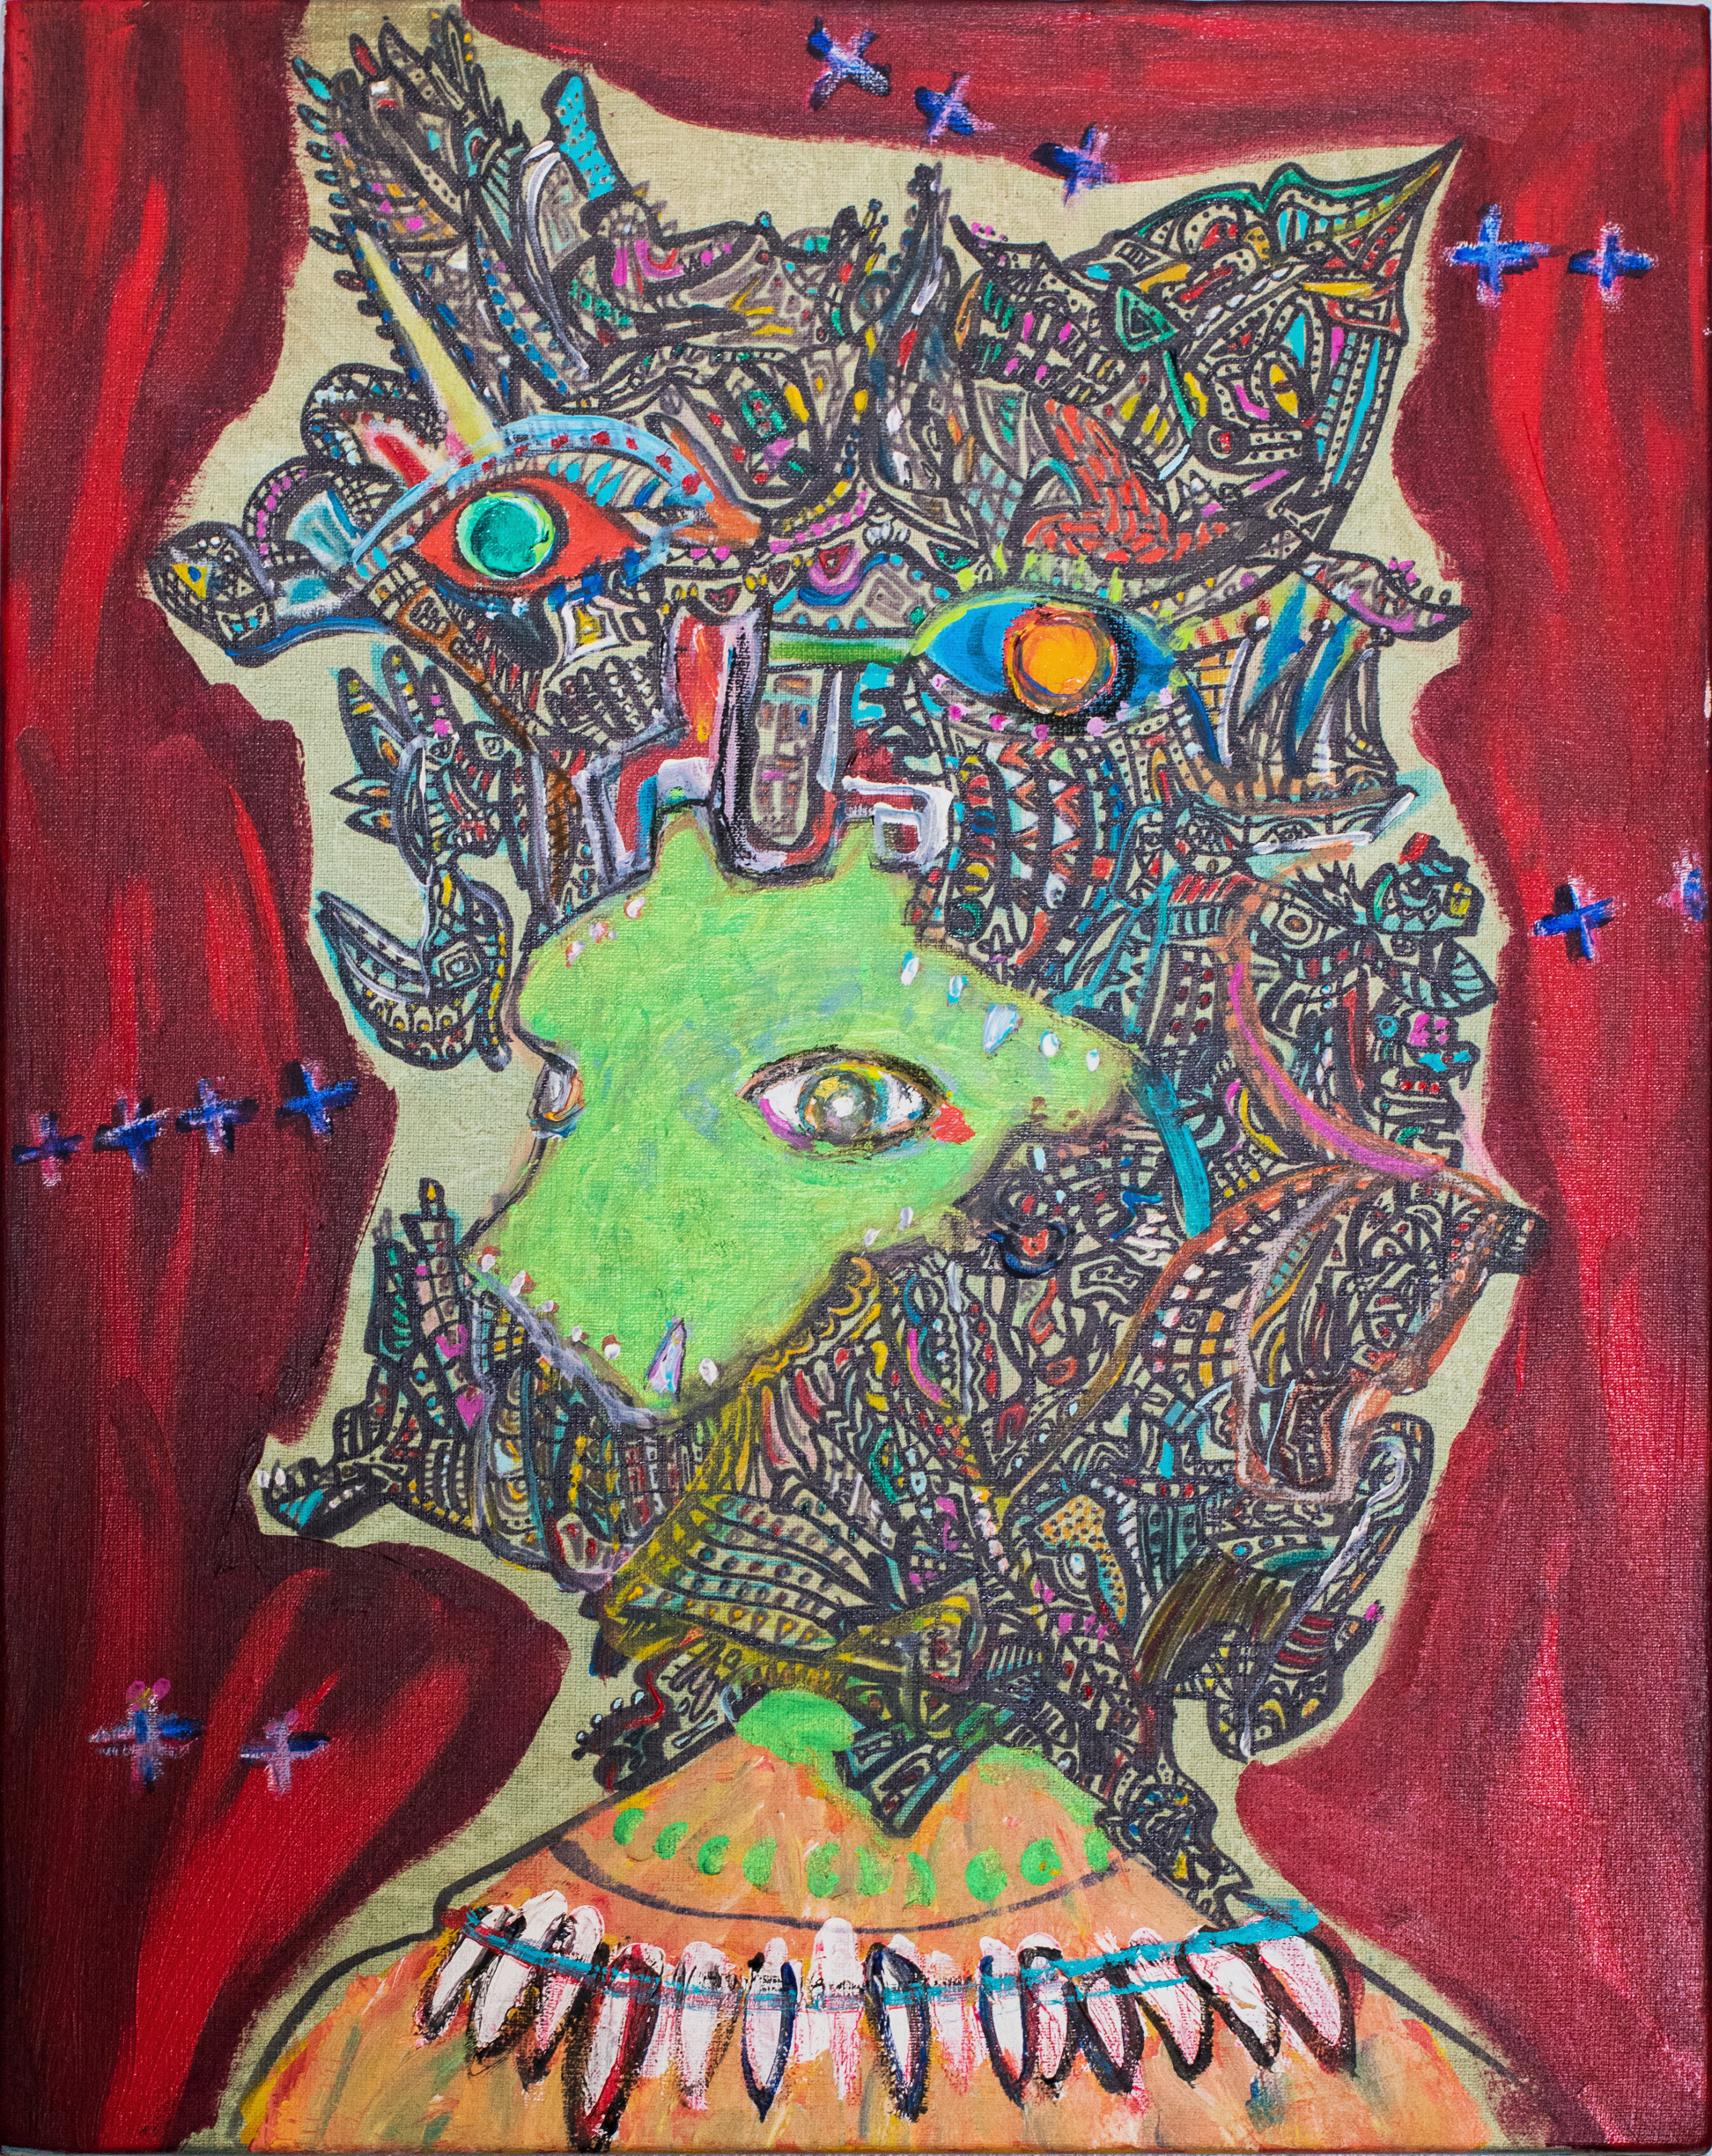    " GERMS "    16 × 20 in  2016 